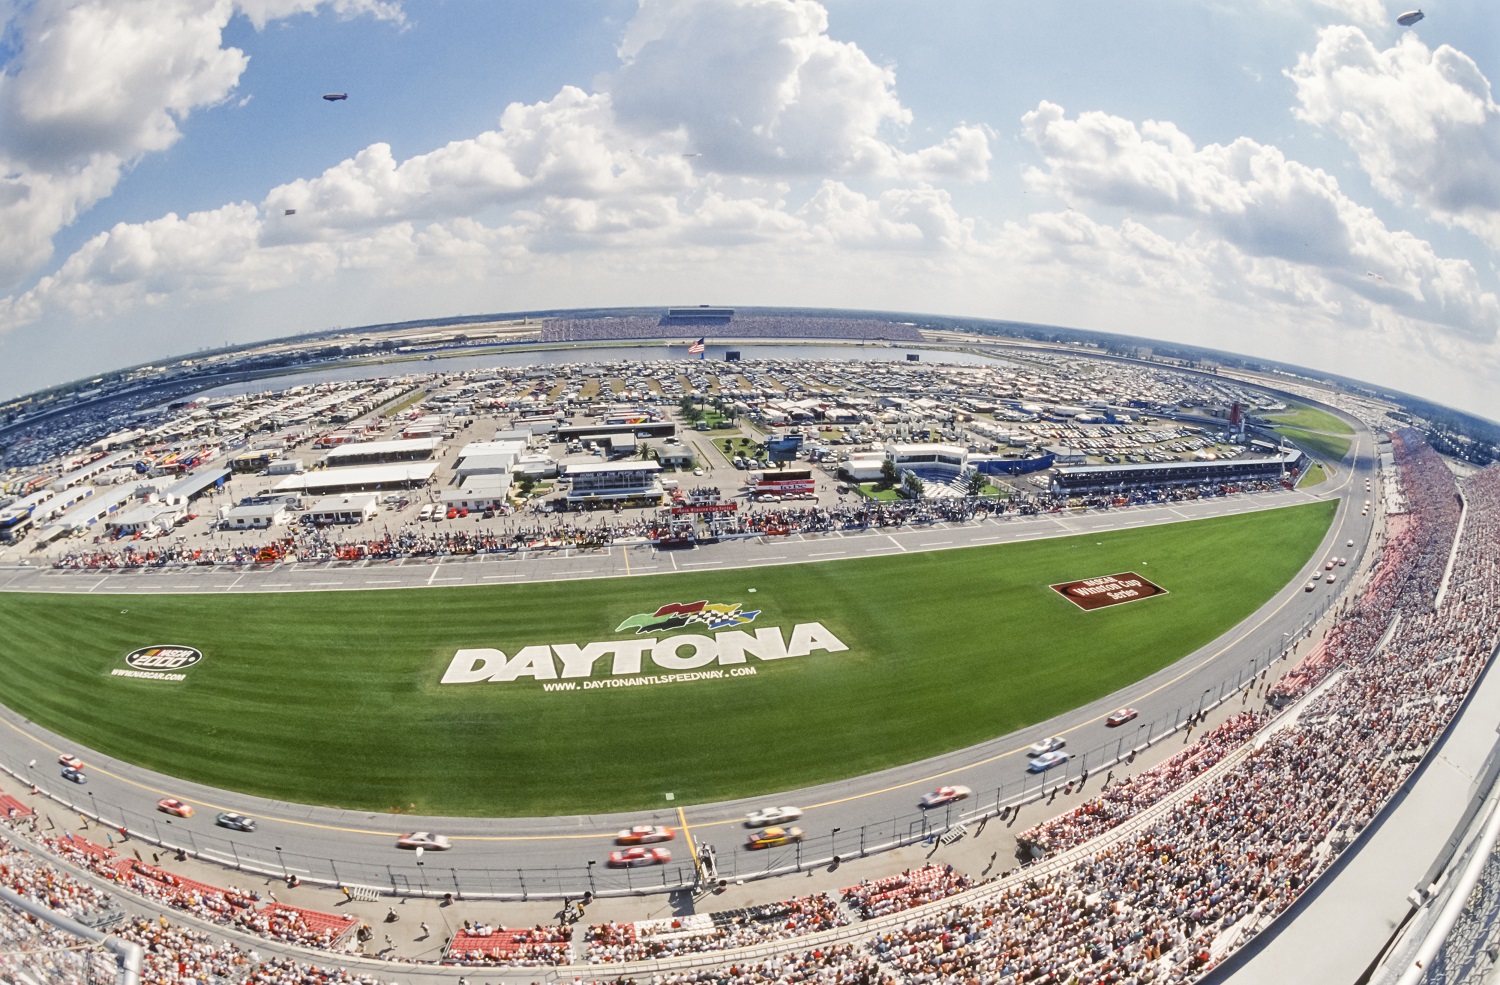 A fish-eye lens view of the Daytona International Speedway from atop the main grandstand.